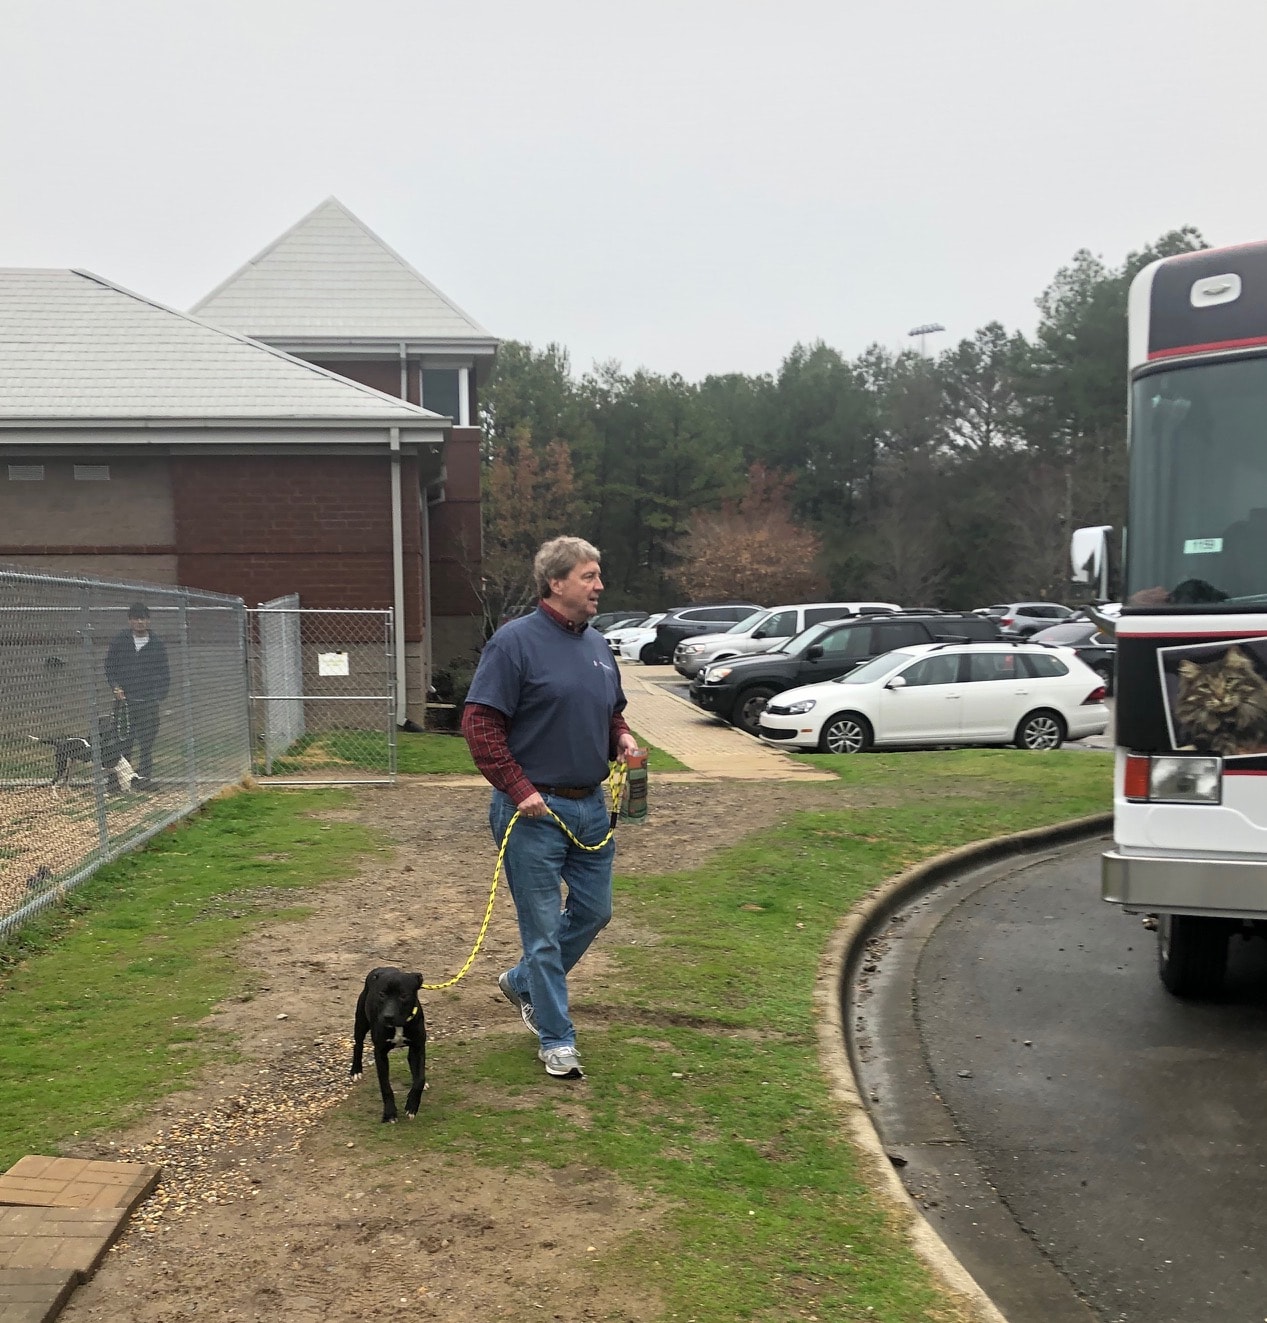 A Man Walking Down A Dirt Road In Front Of A Bus